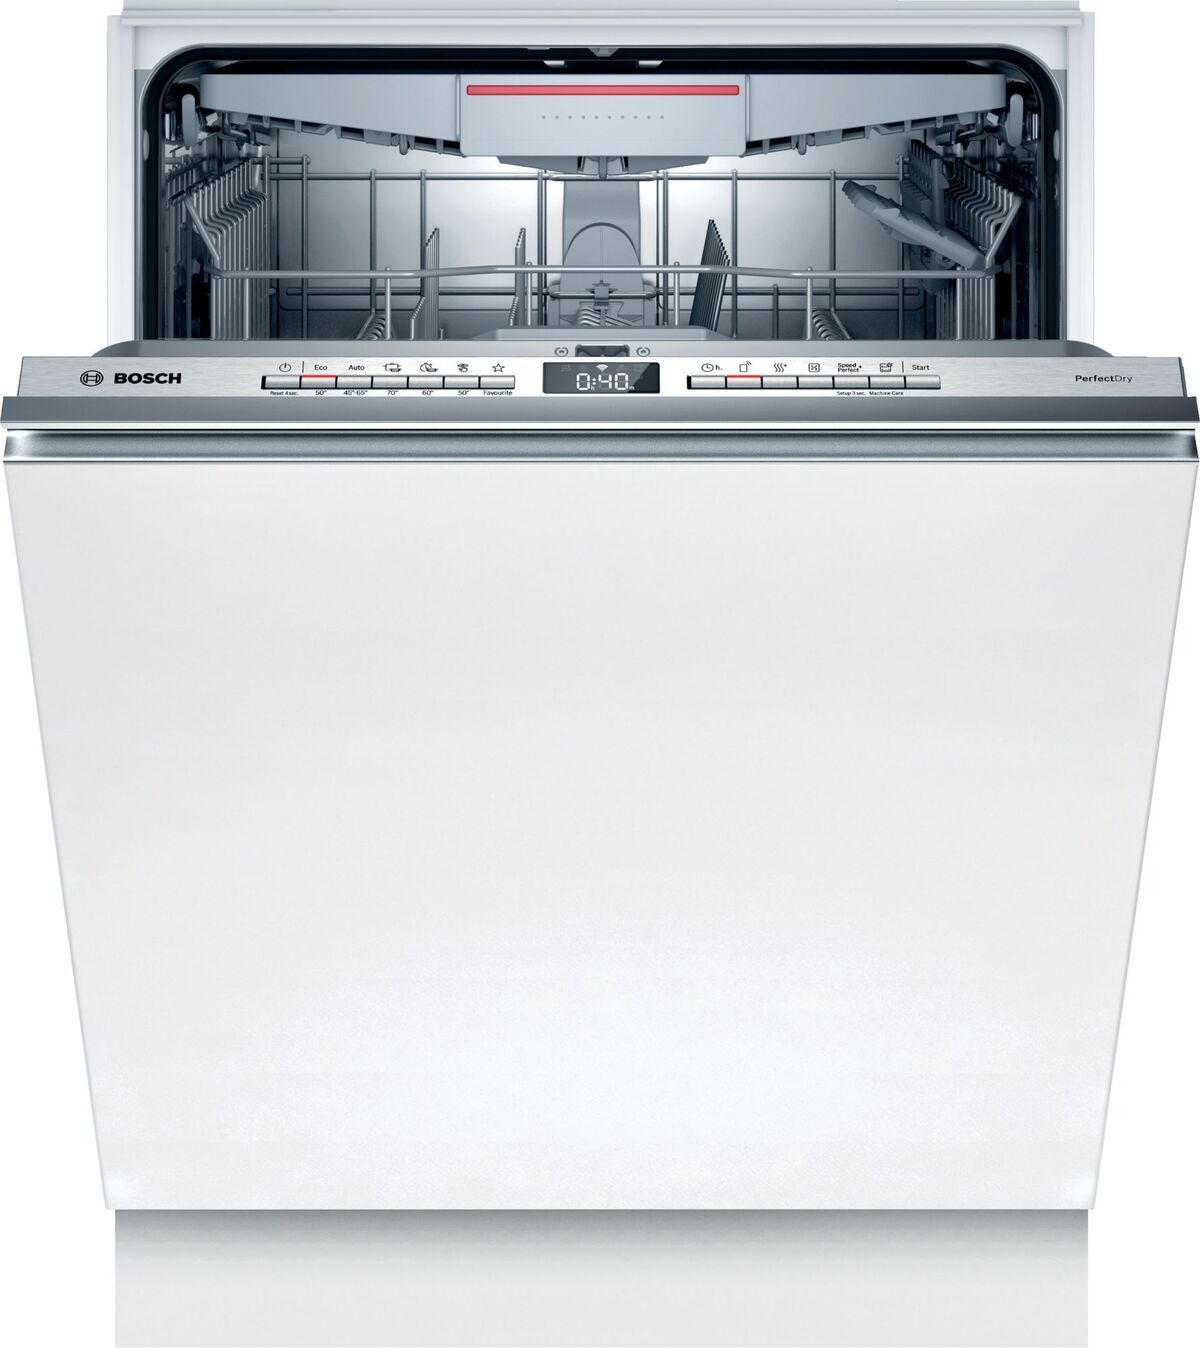 Bosch Smd6tcx00e Serie 6 Fully Integrated Dishwasher Long Delays On This Model